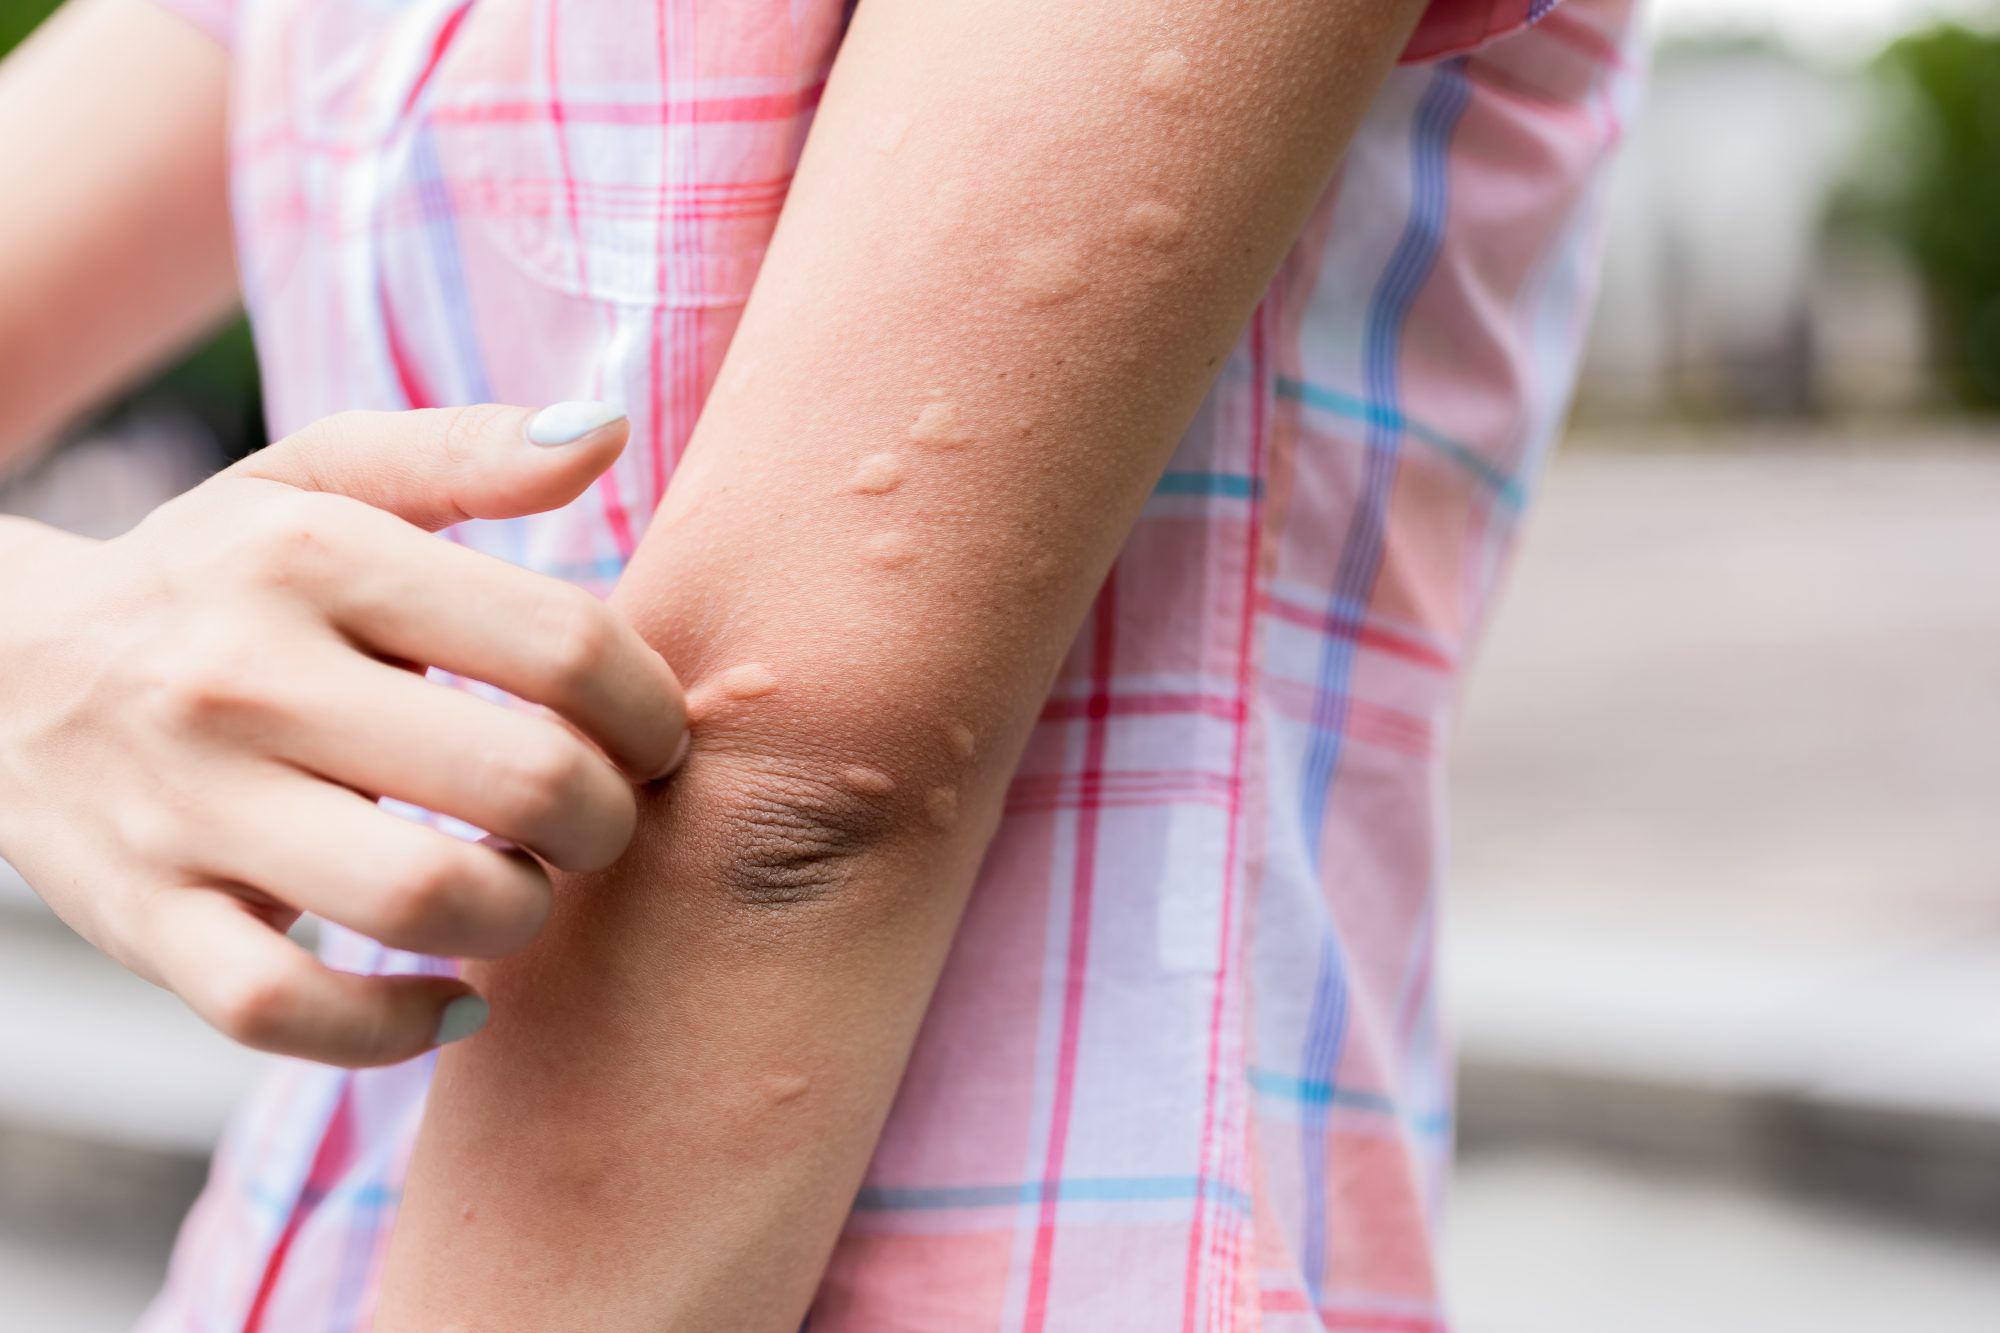 Red and itchy? When to worry about a rash in adults